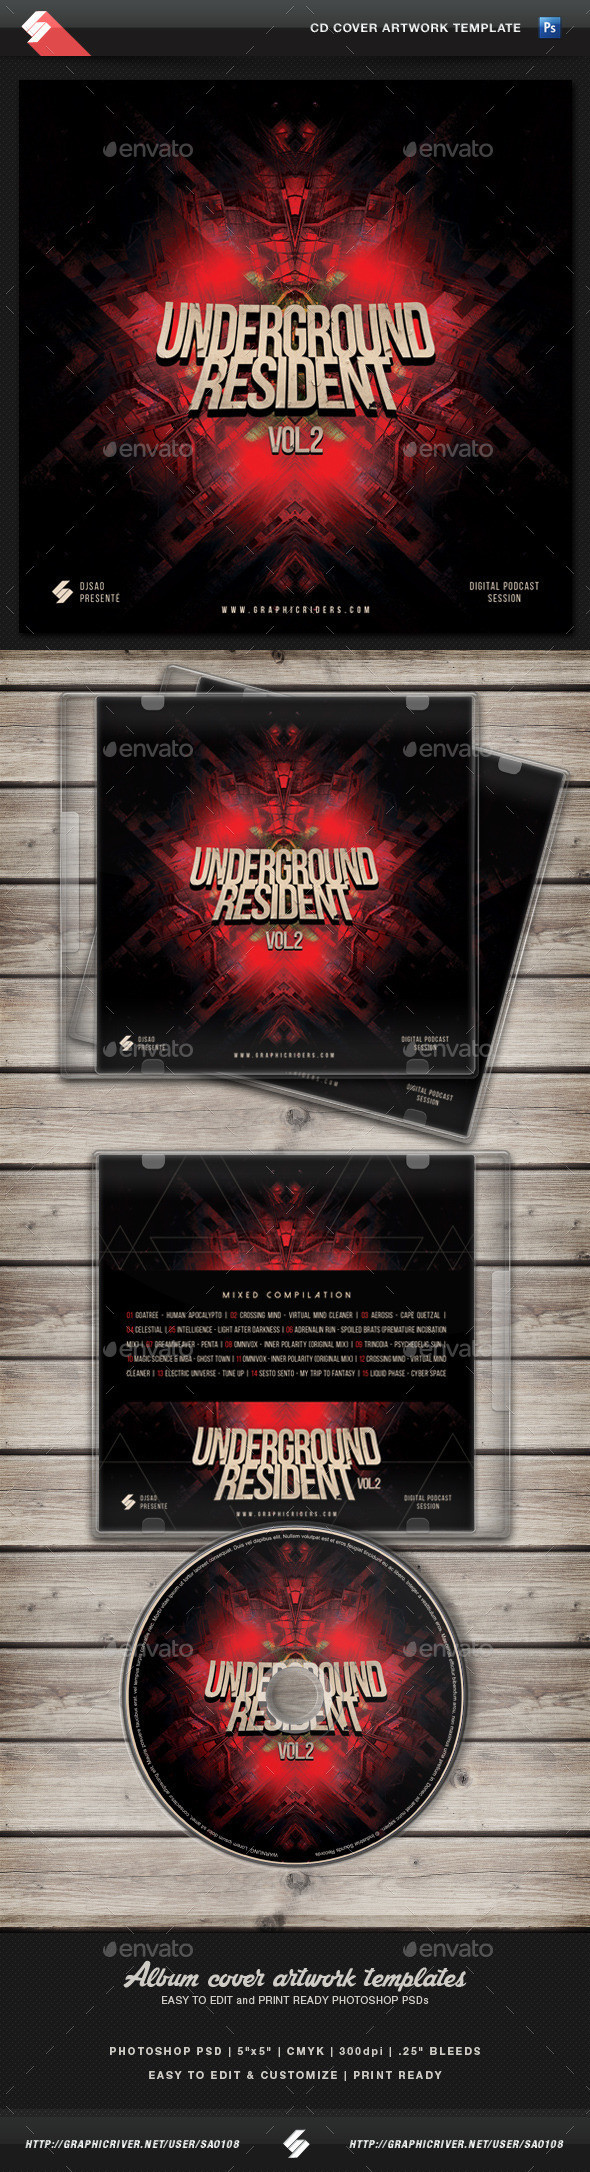 Undergroundresident vol2 cd cover template preview